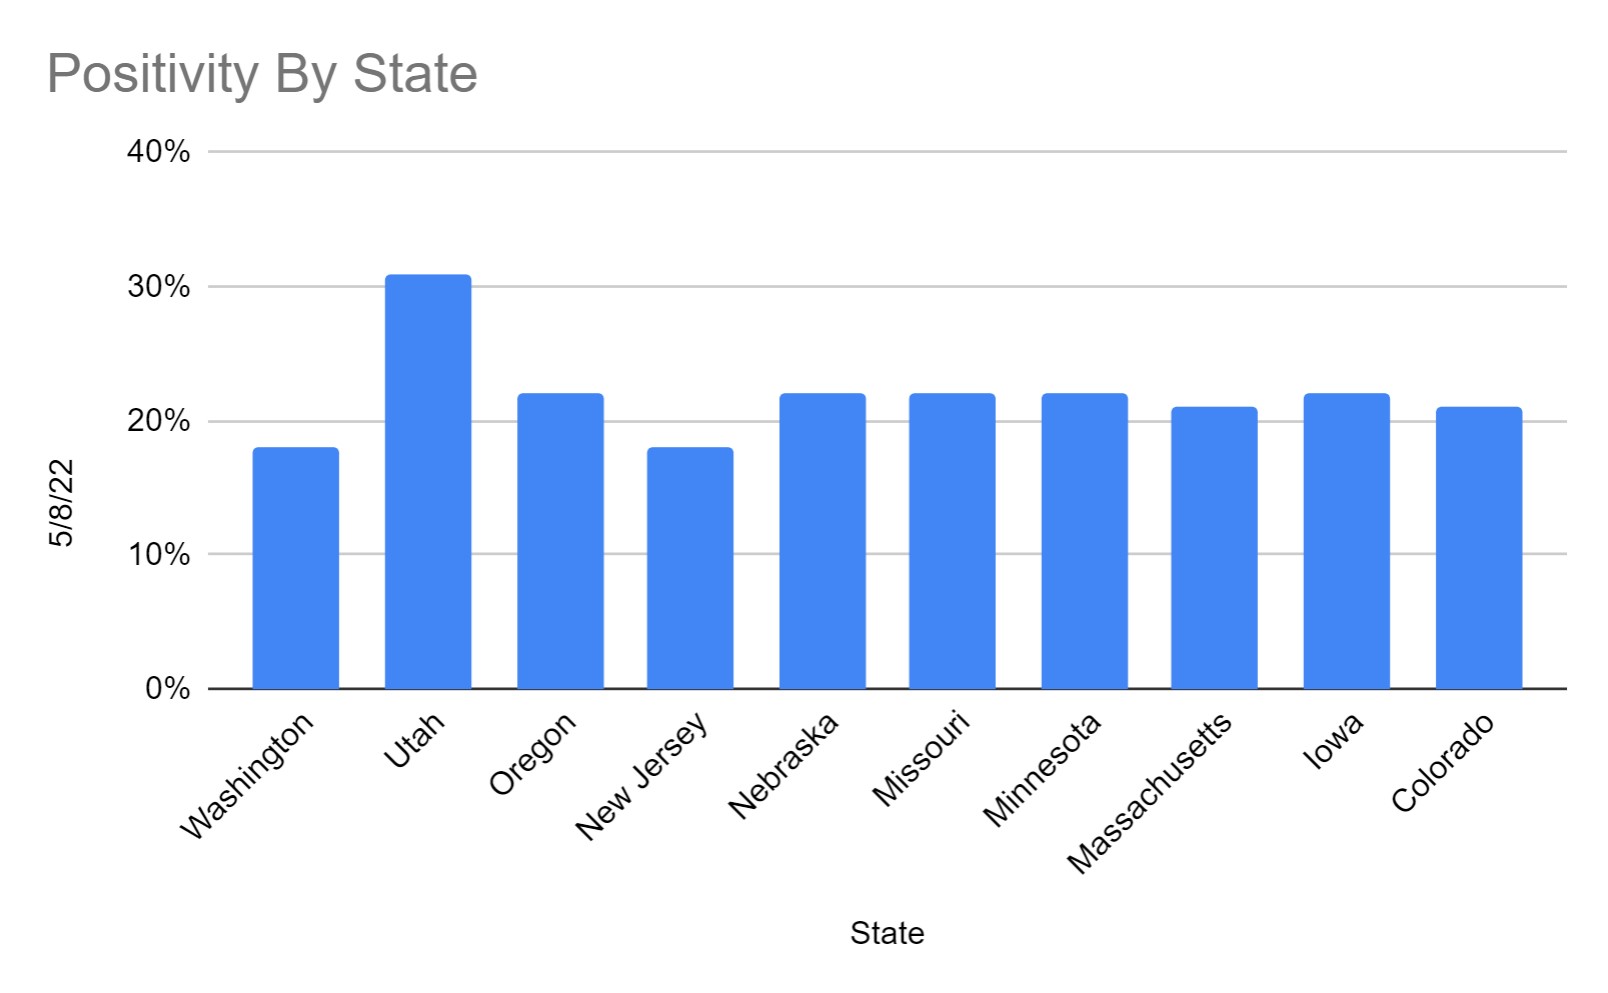 Bar graph of covid positivity rates across states